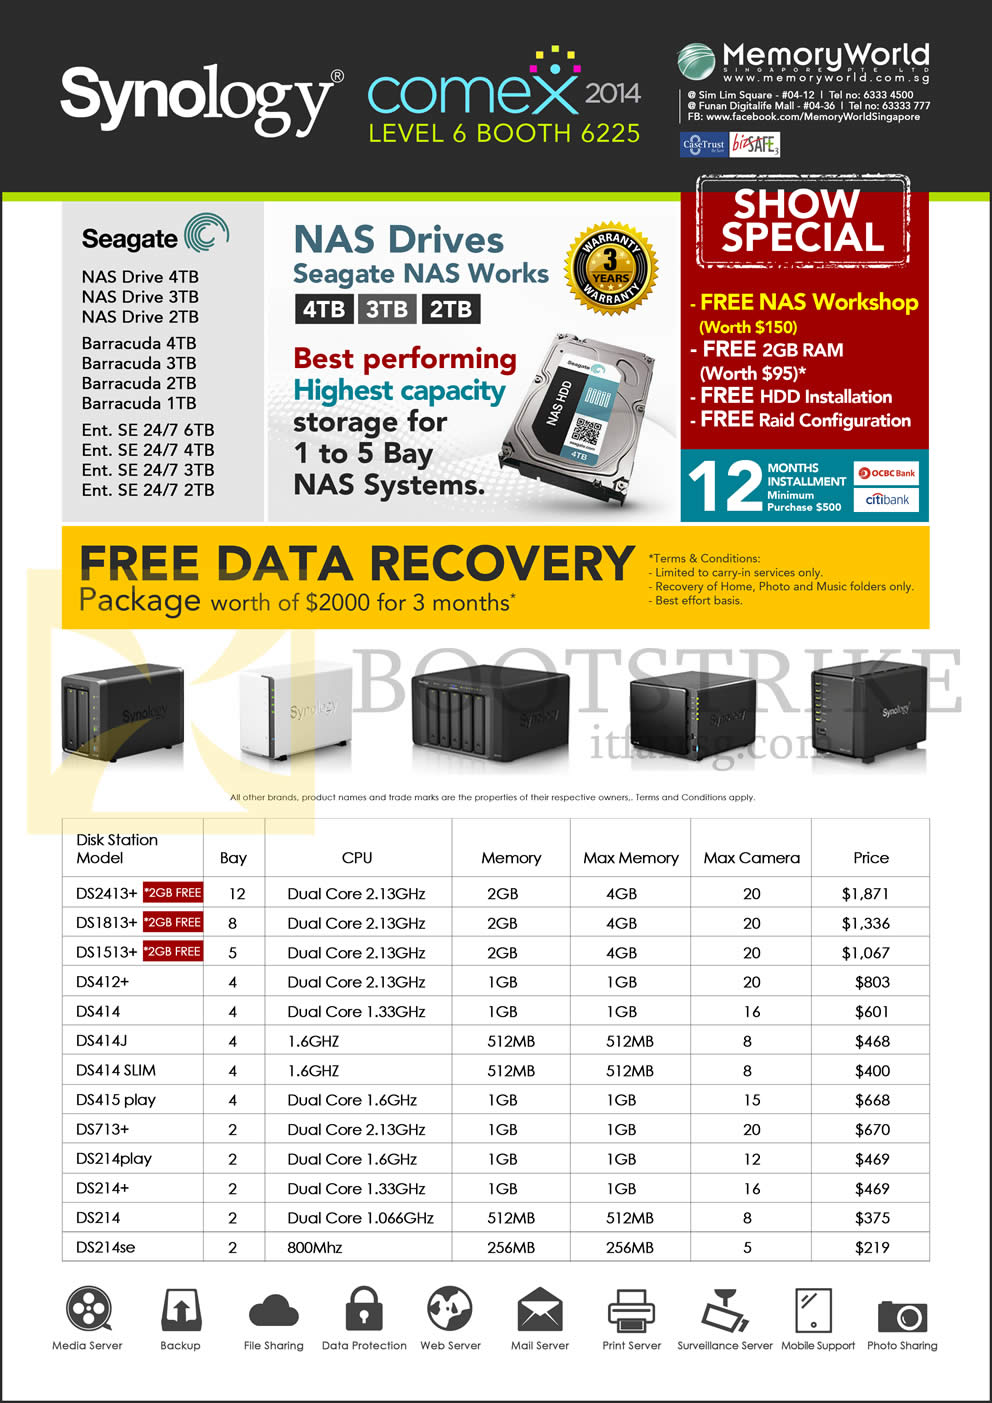 COMEX 2014 price list image brochure of Memory World Synology NAS, NAS Drives, DiskStation DS2413 1813 1513 412 414 415 713 Plus DS214